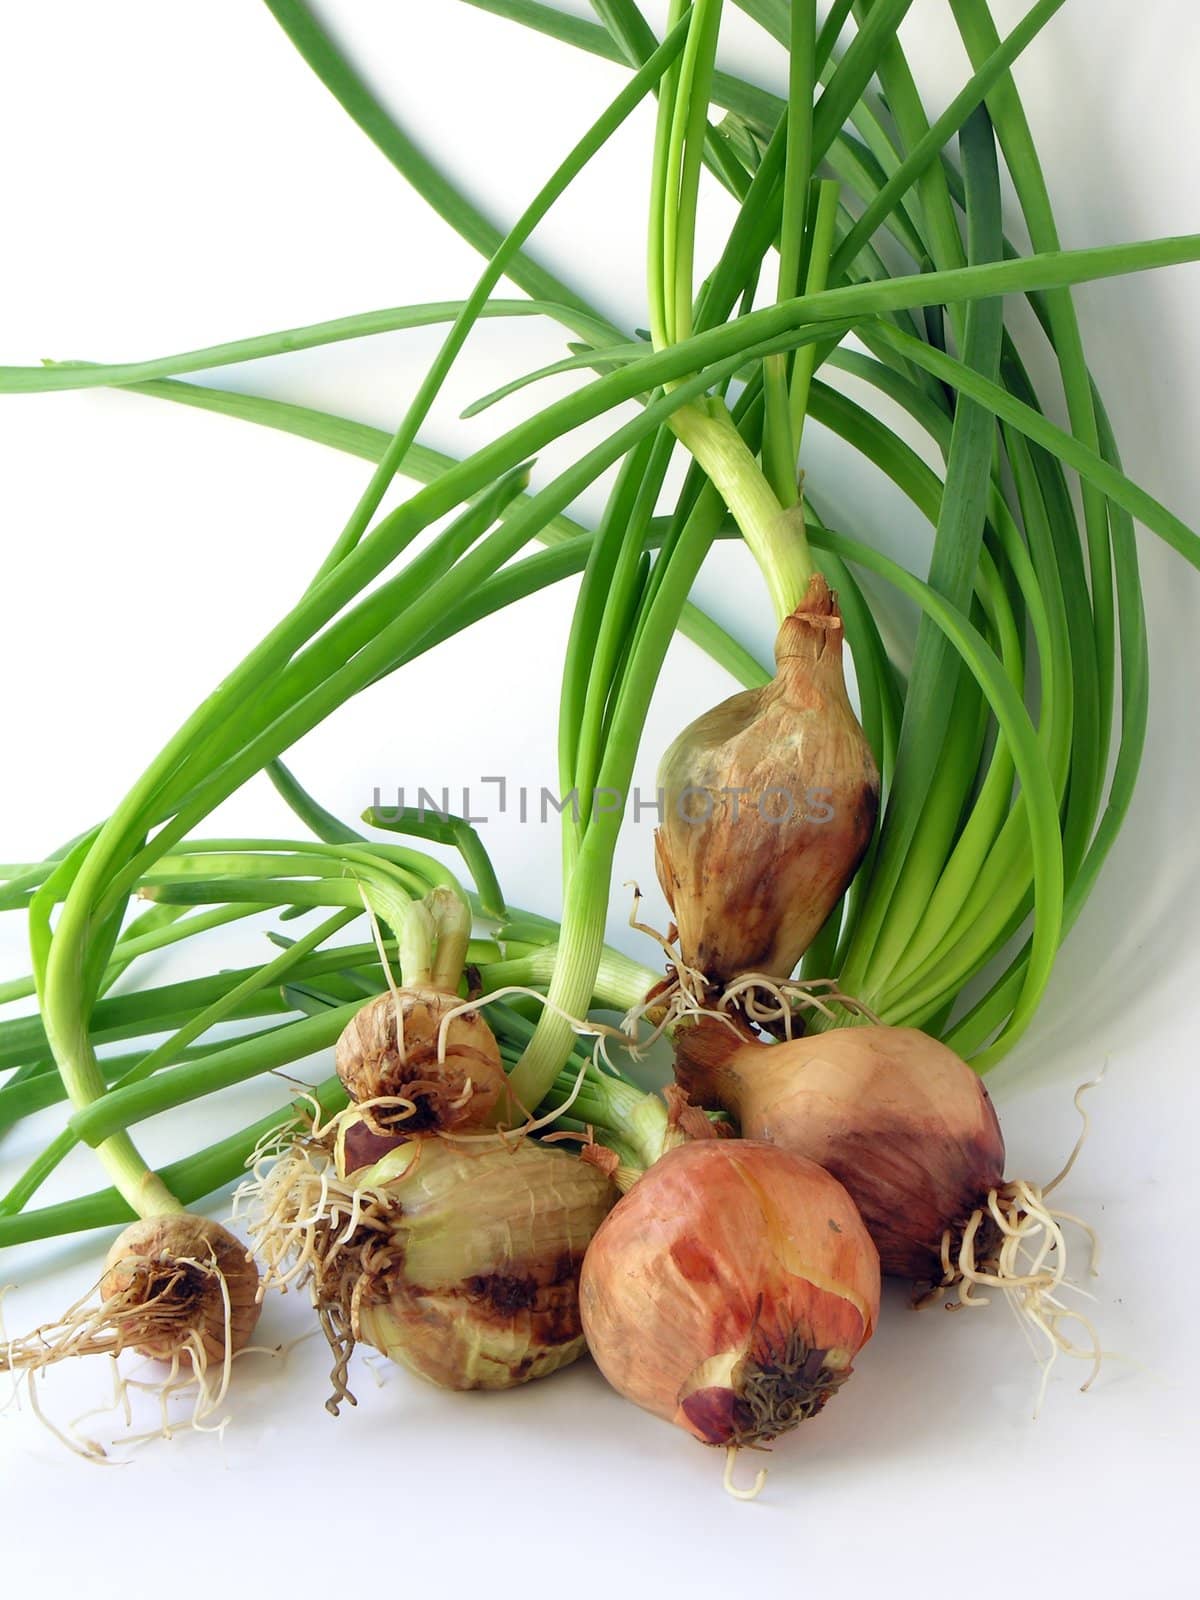 early onions with green leaves